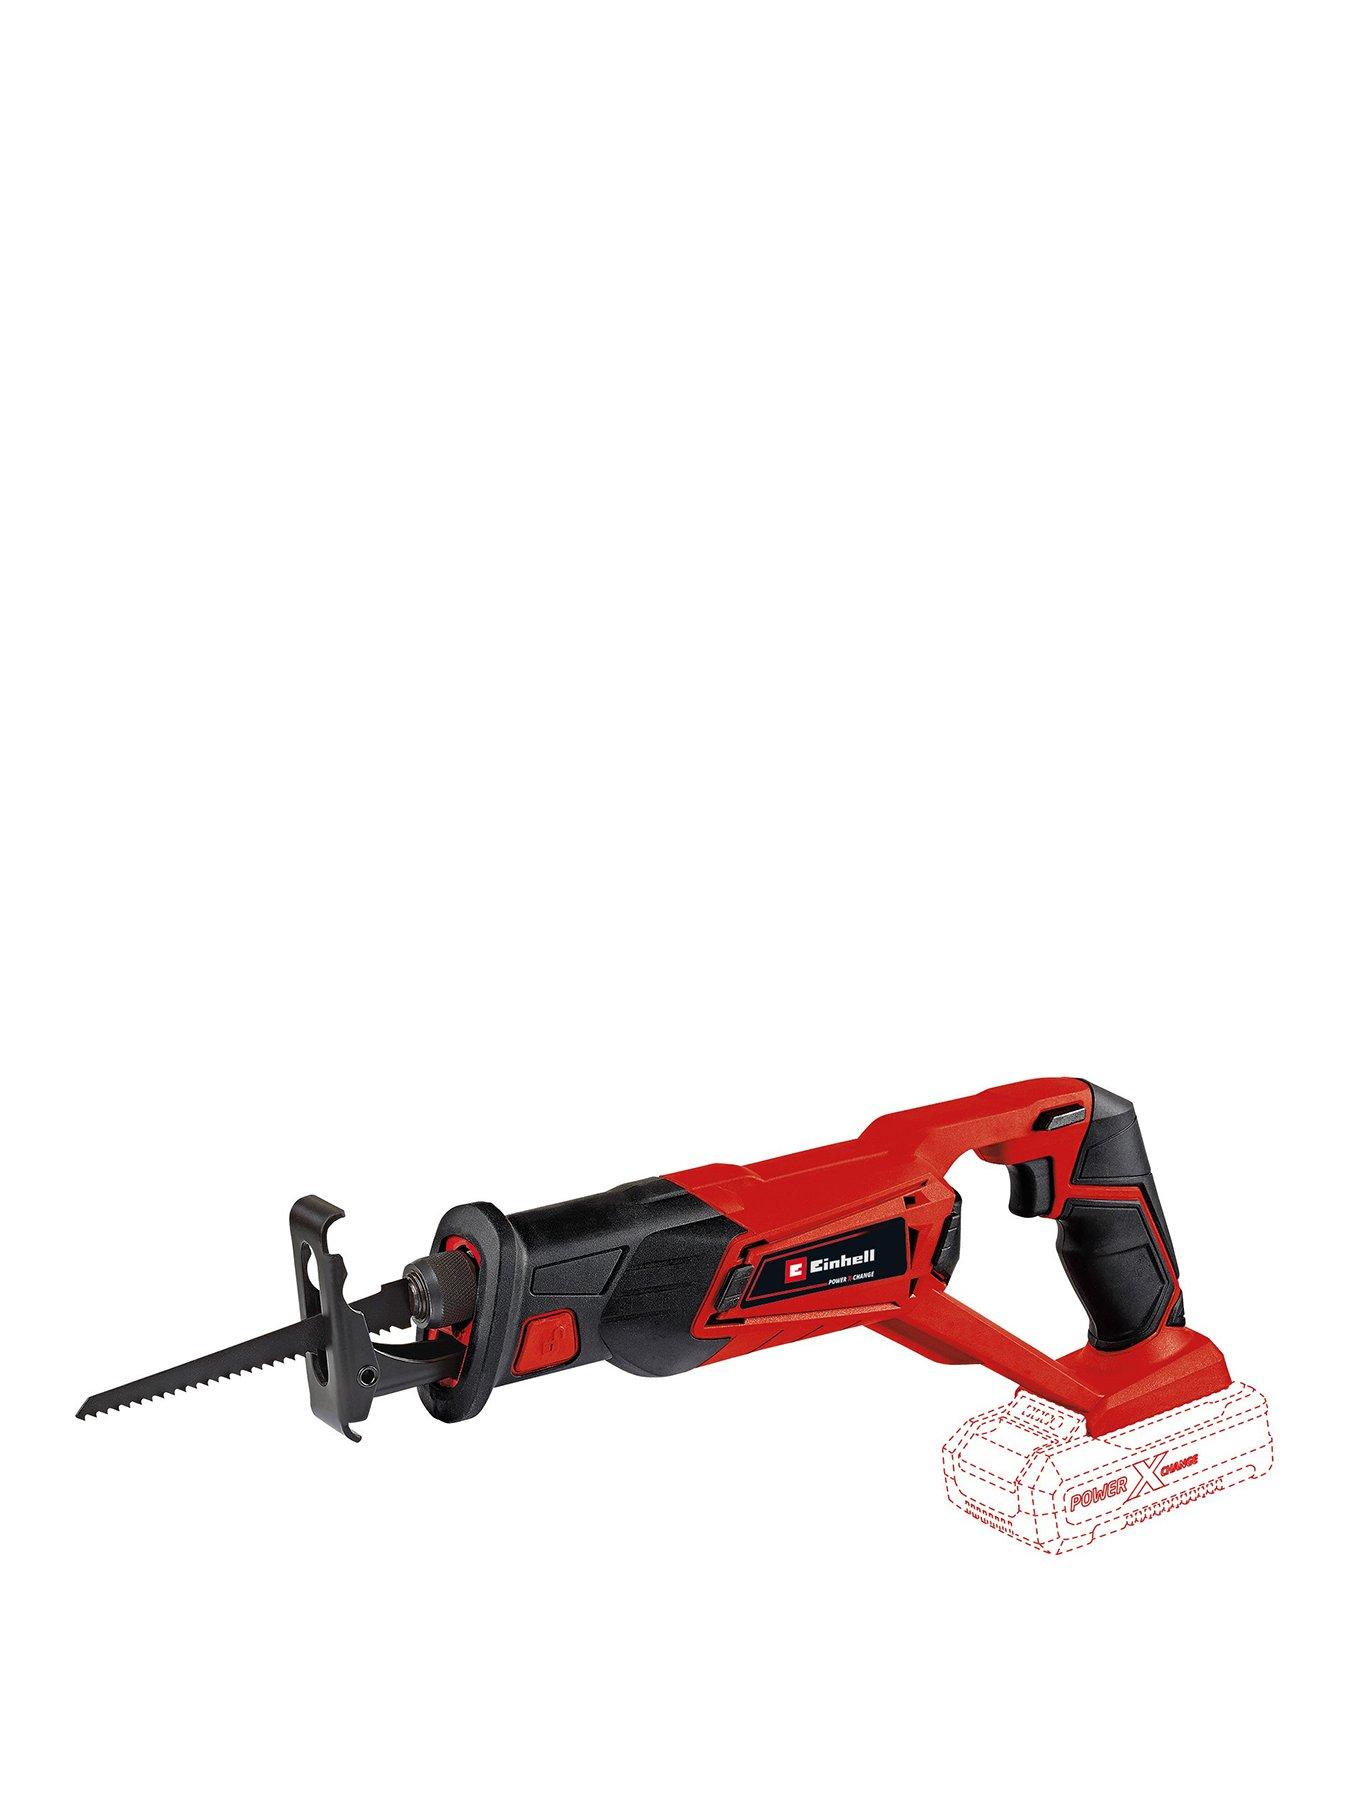 EINHELL TC-MG 135 E - 135W Grinding and Engraving Tool